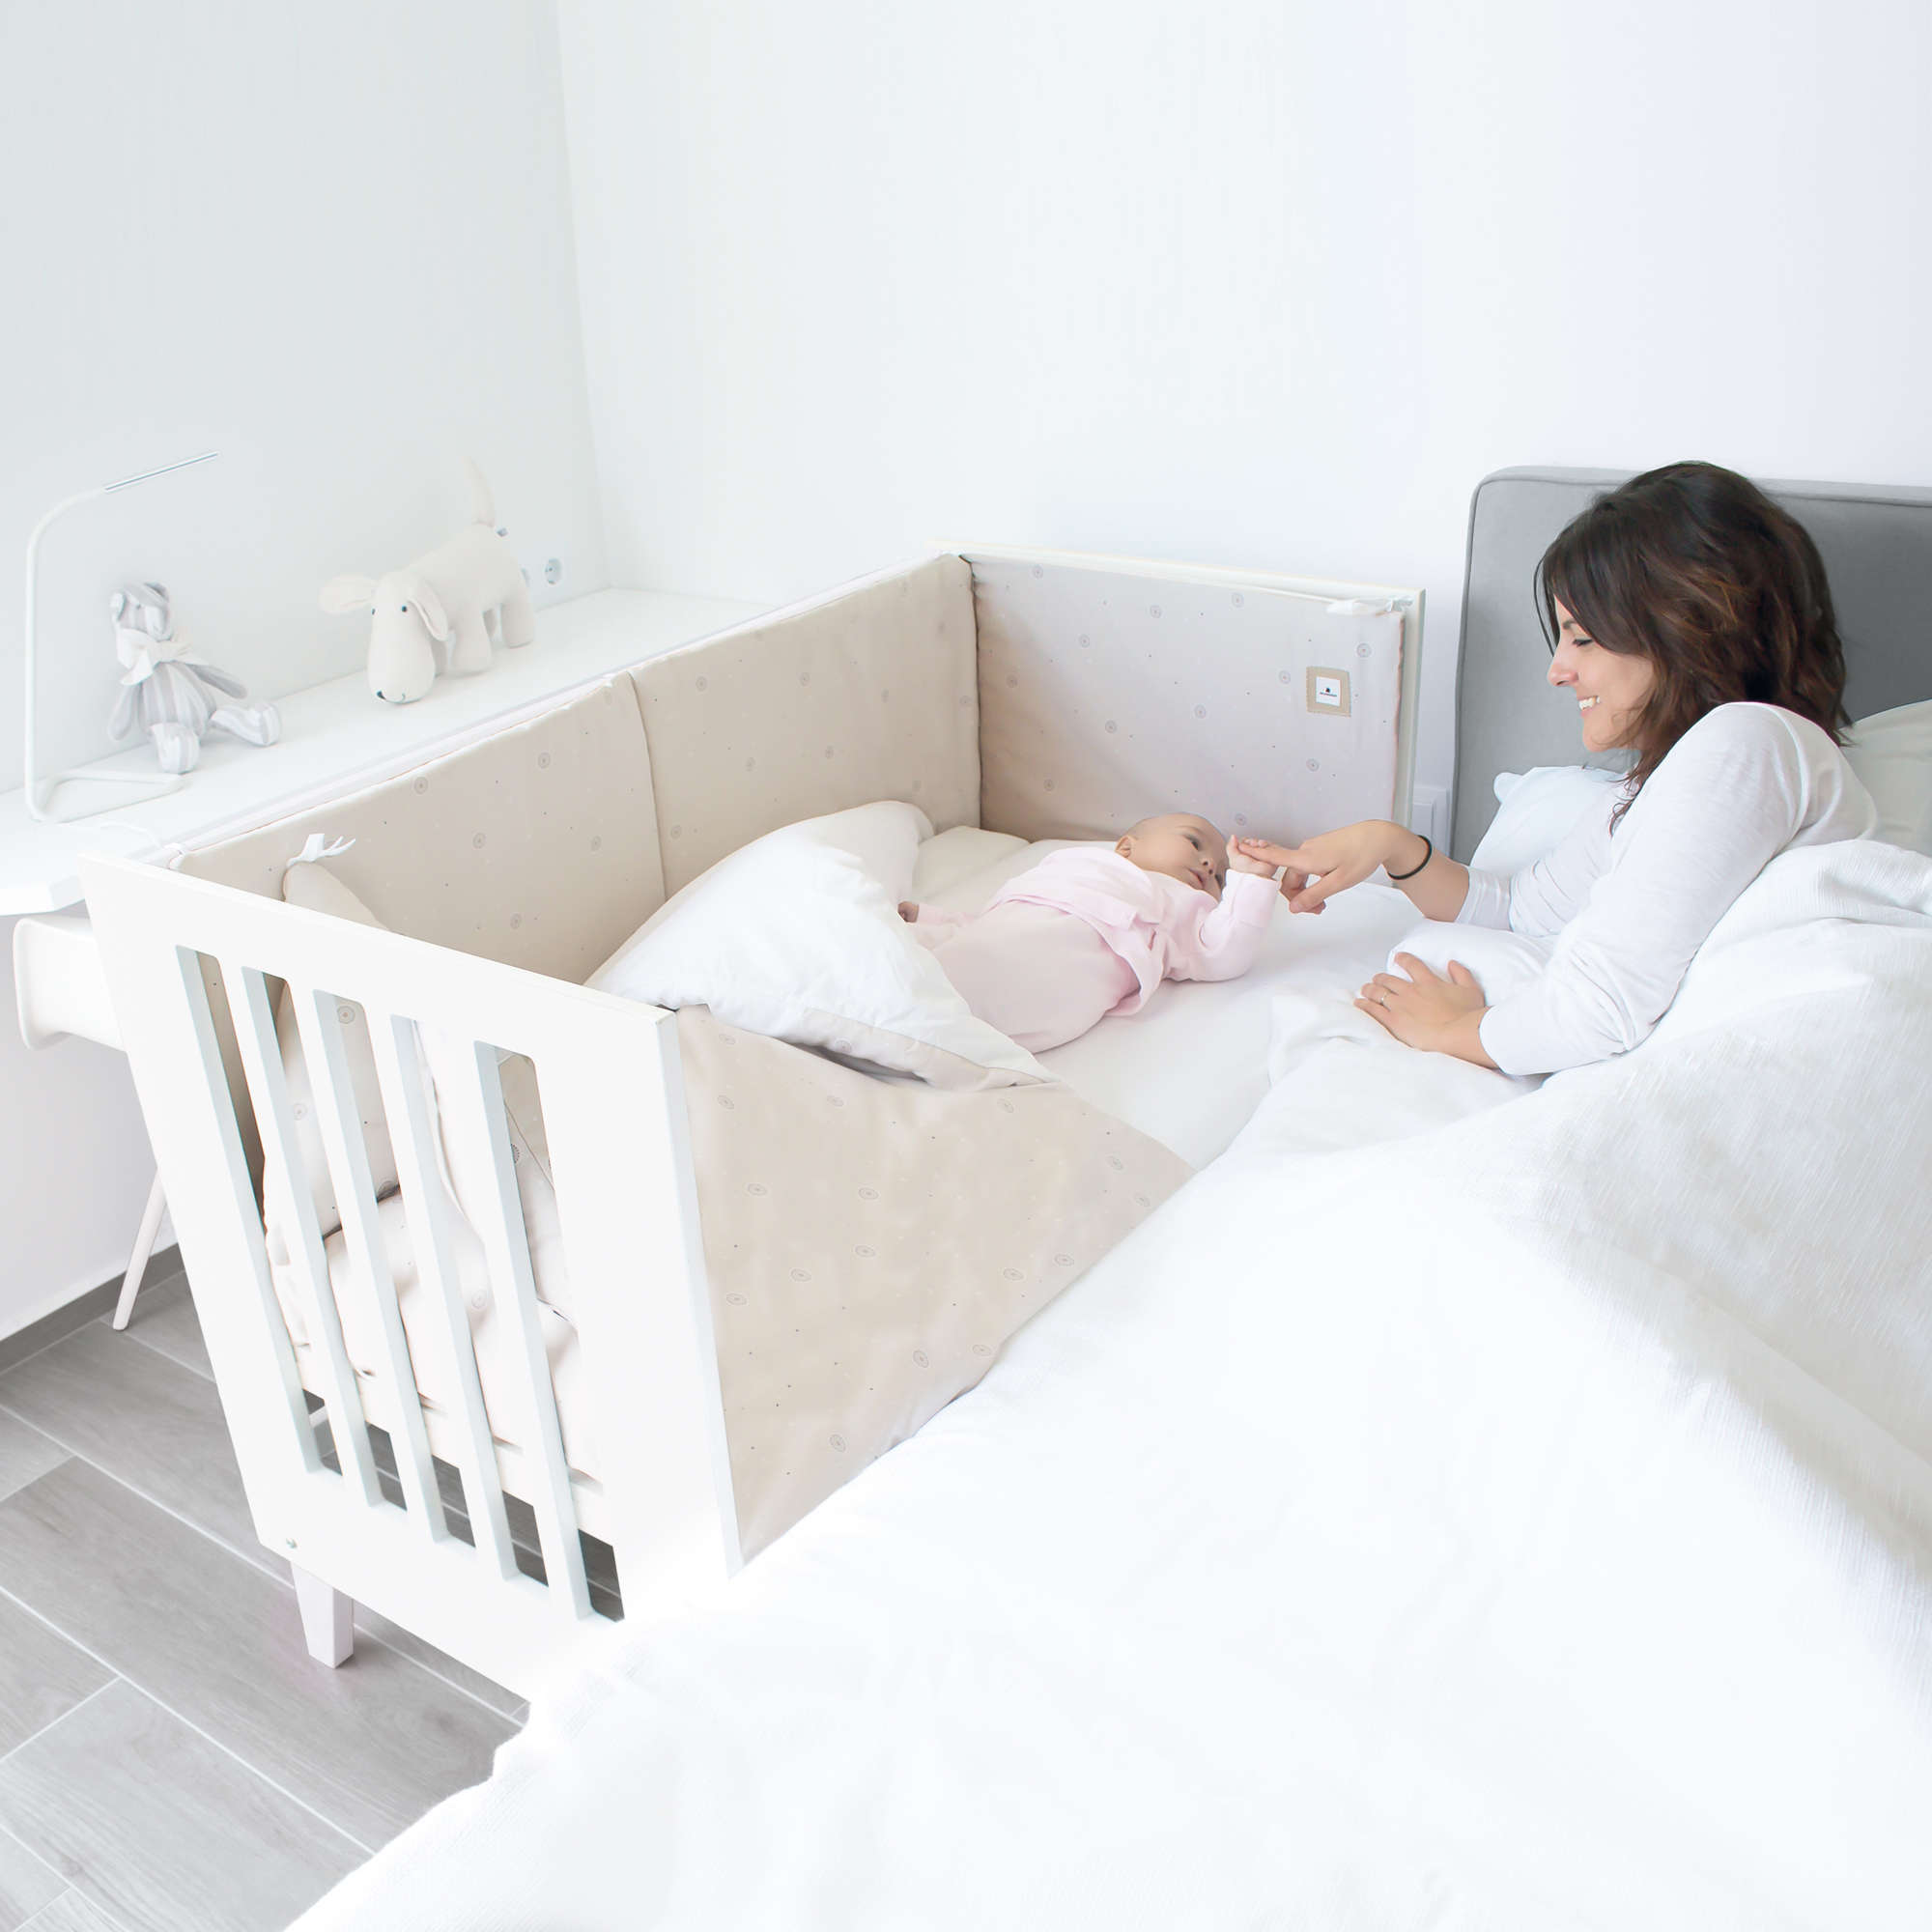 Wooden co-sleeping cots